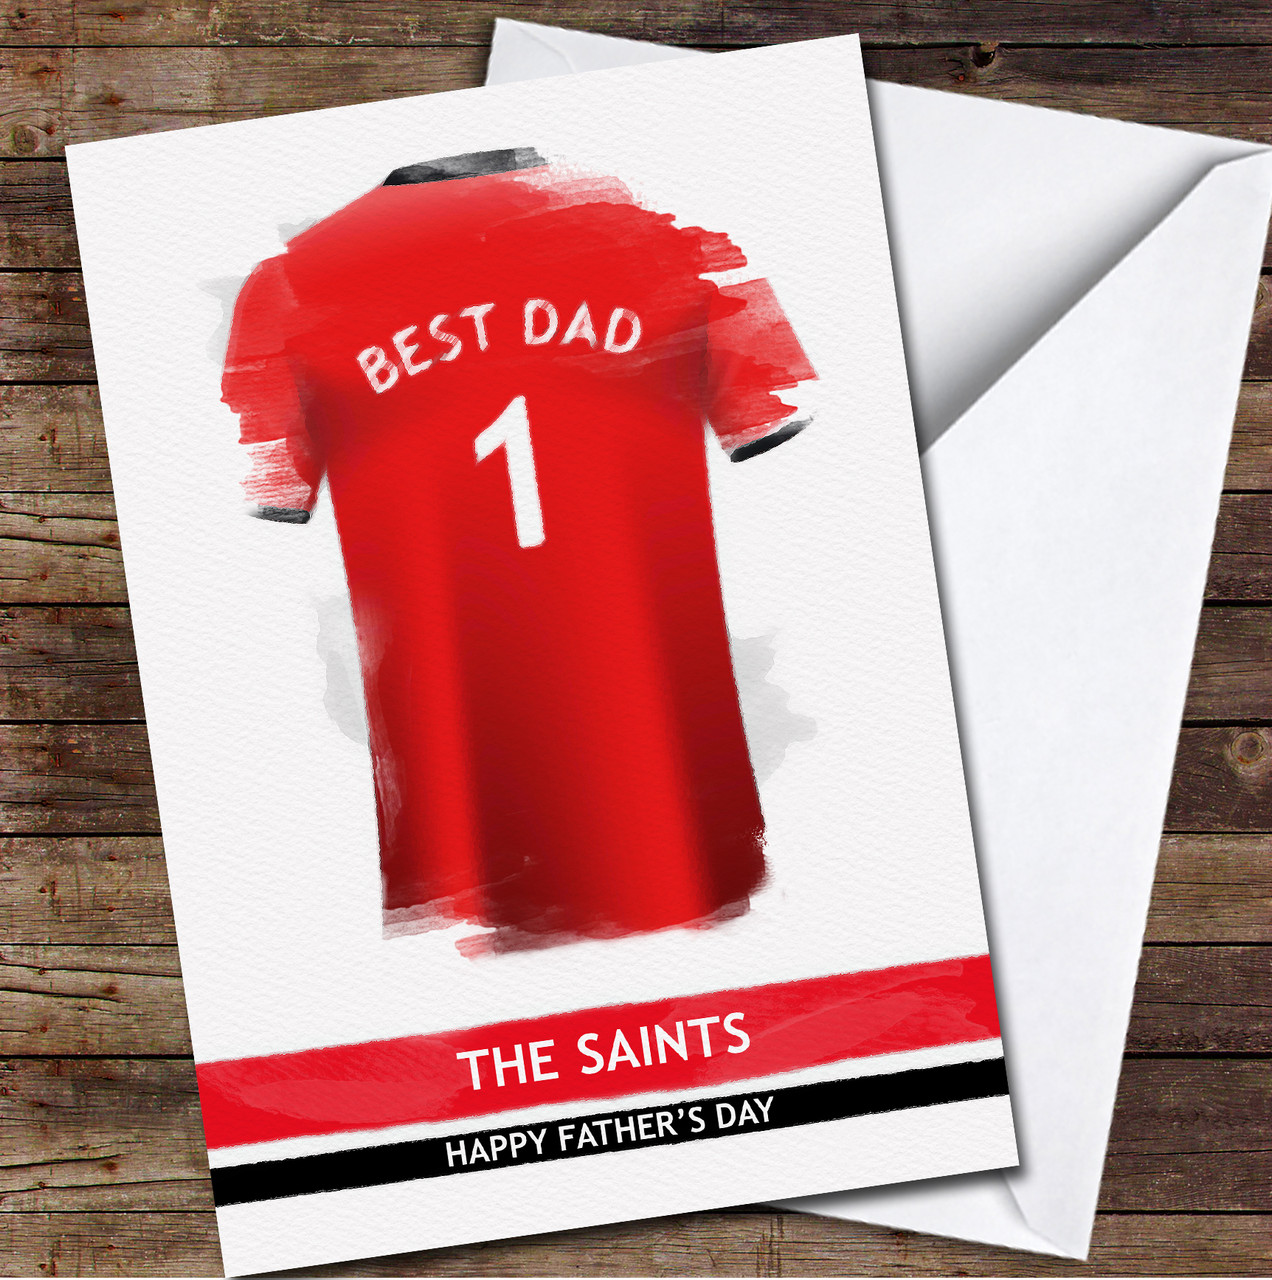 Southampton Football Team Shirt Paint Effect Best Dad Personalized Father's  Day Greetings Card - Red Heart Print